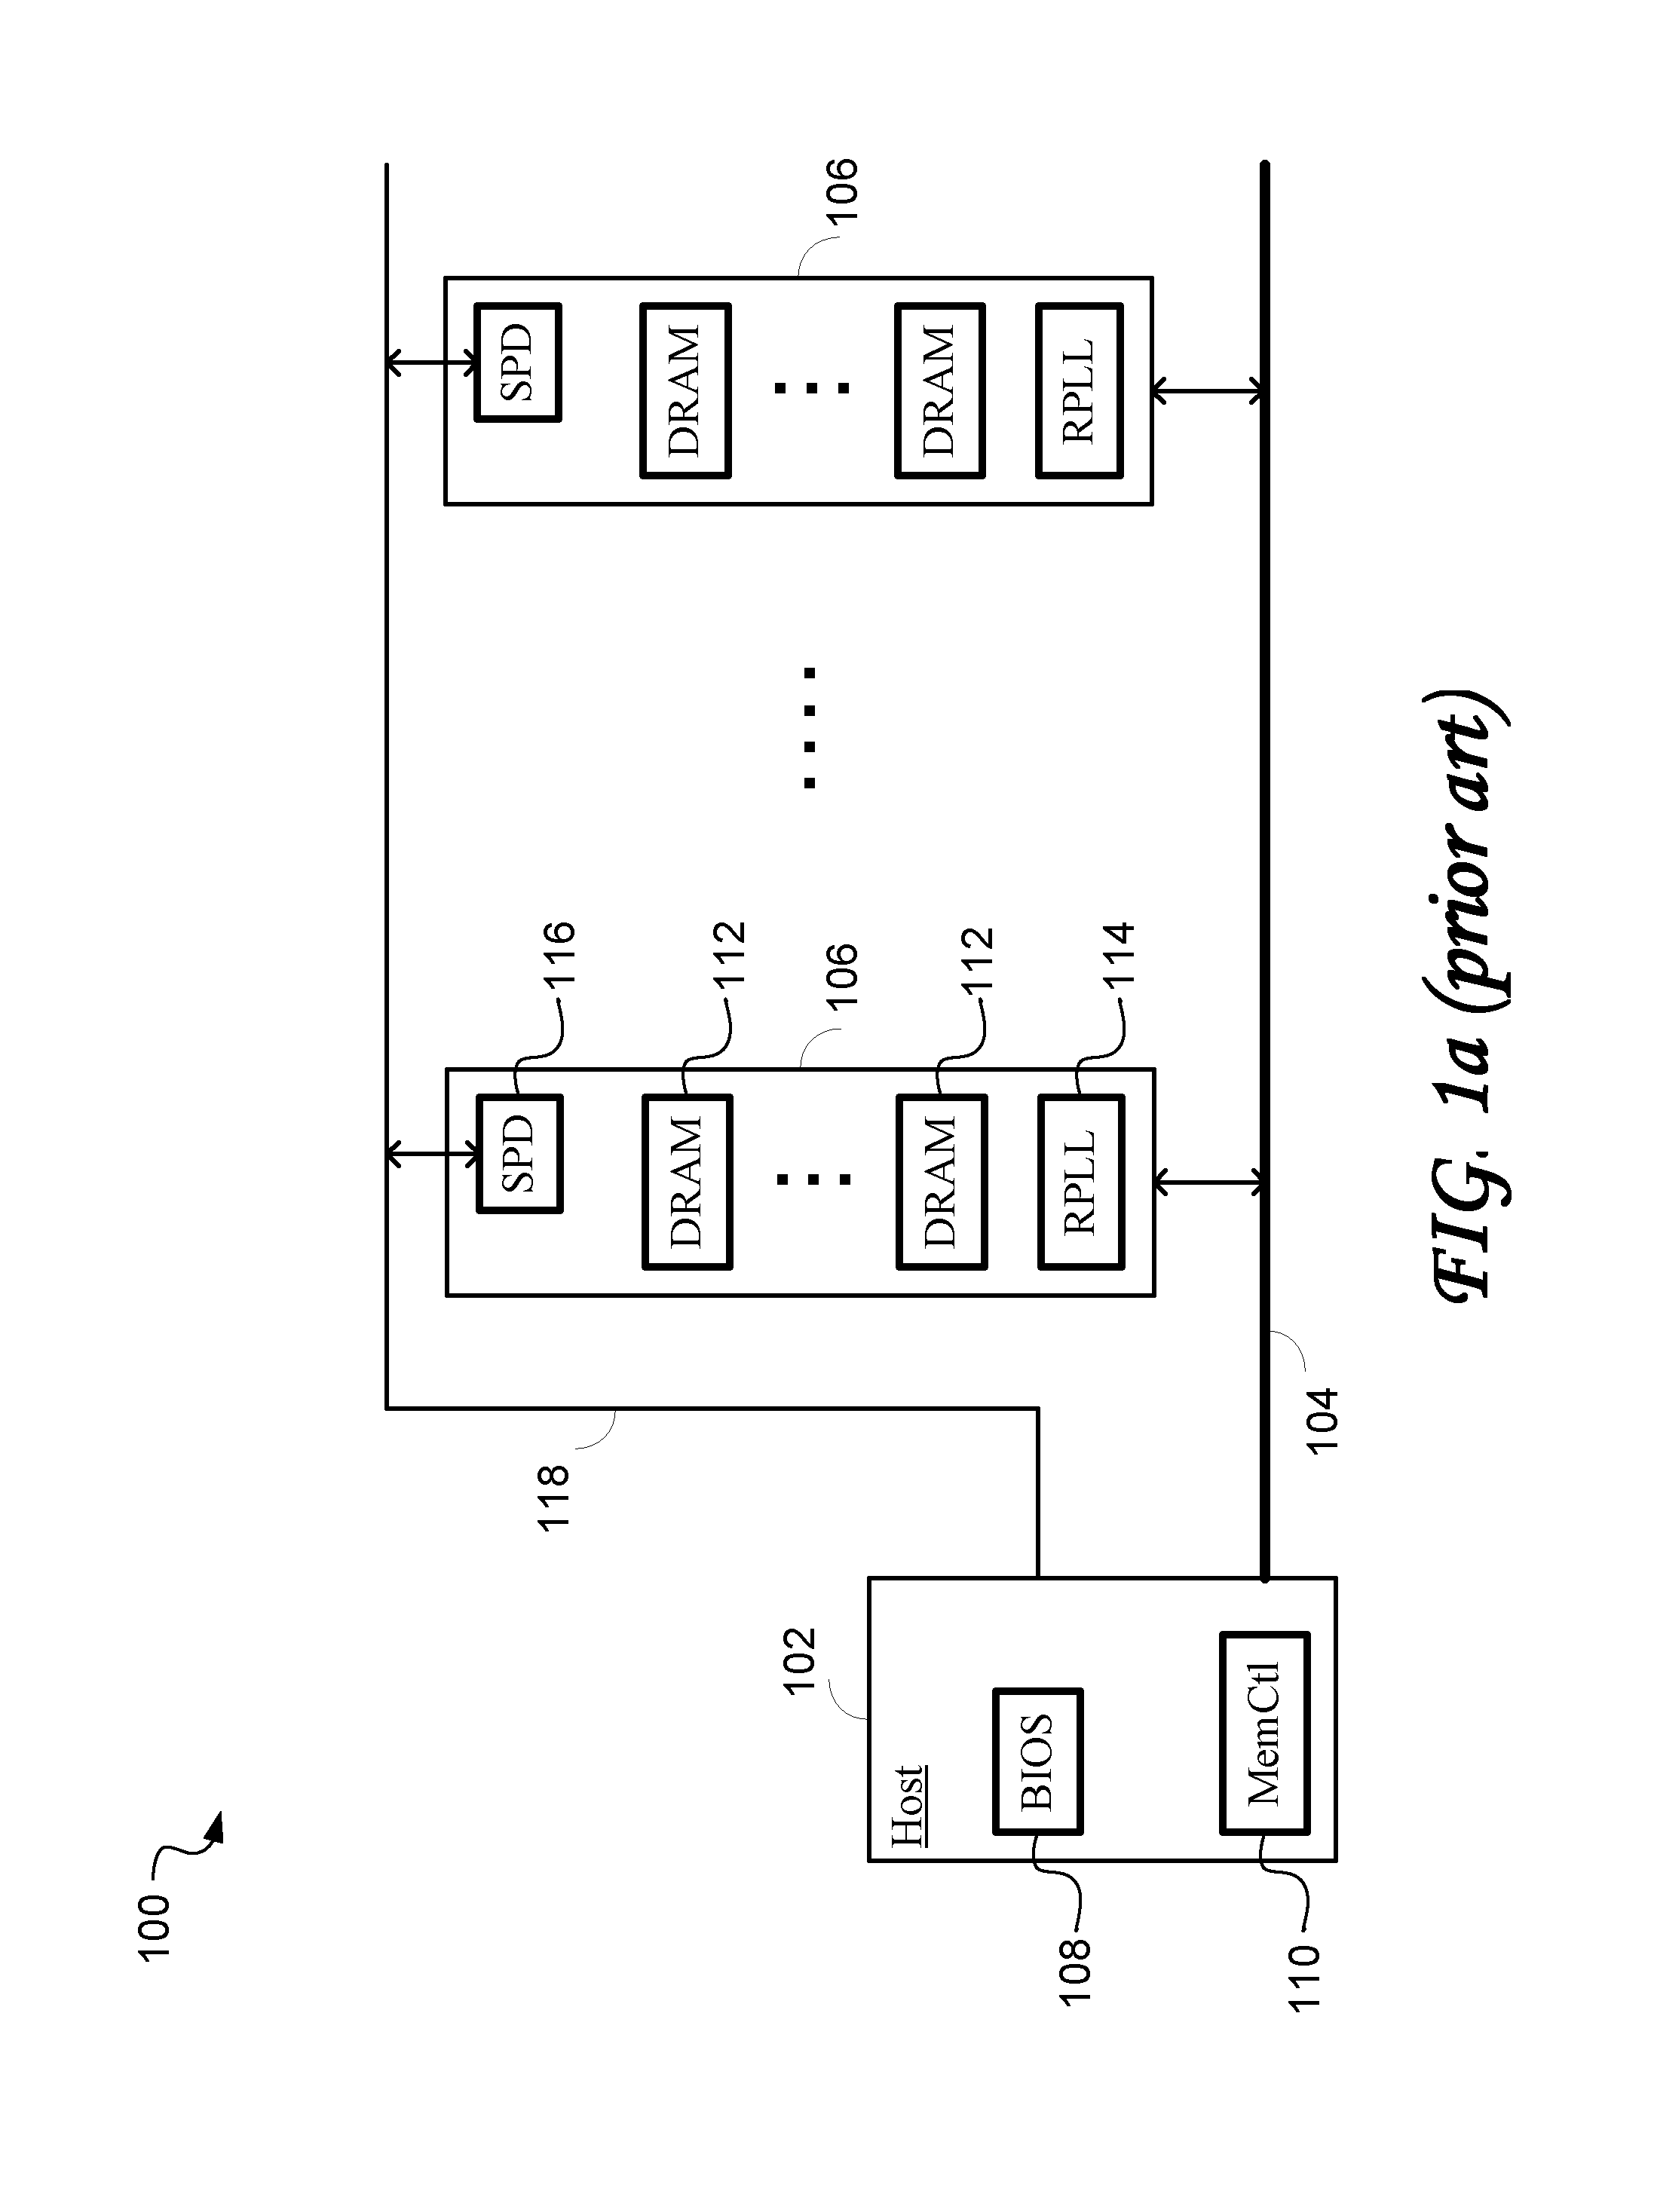 Load reduction dual in-line memory module (lrdimm) and method for programming the same